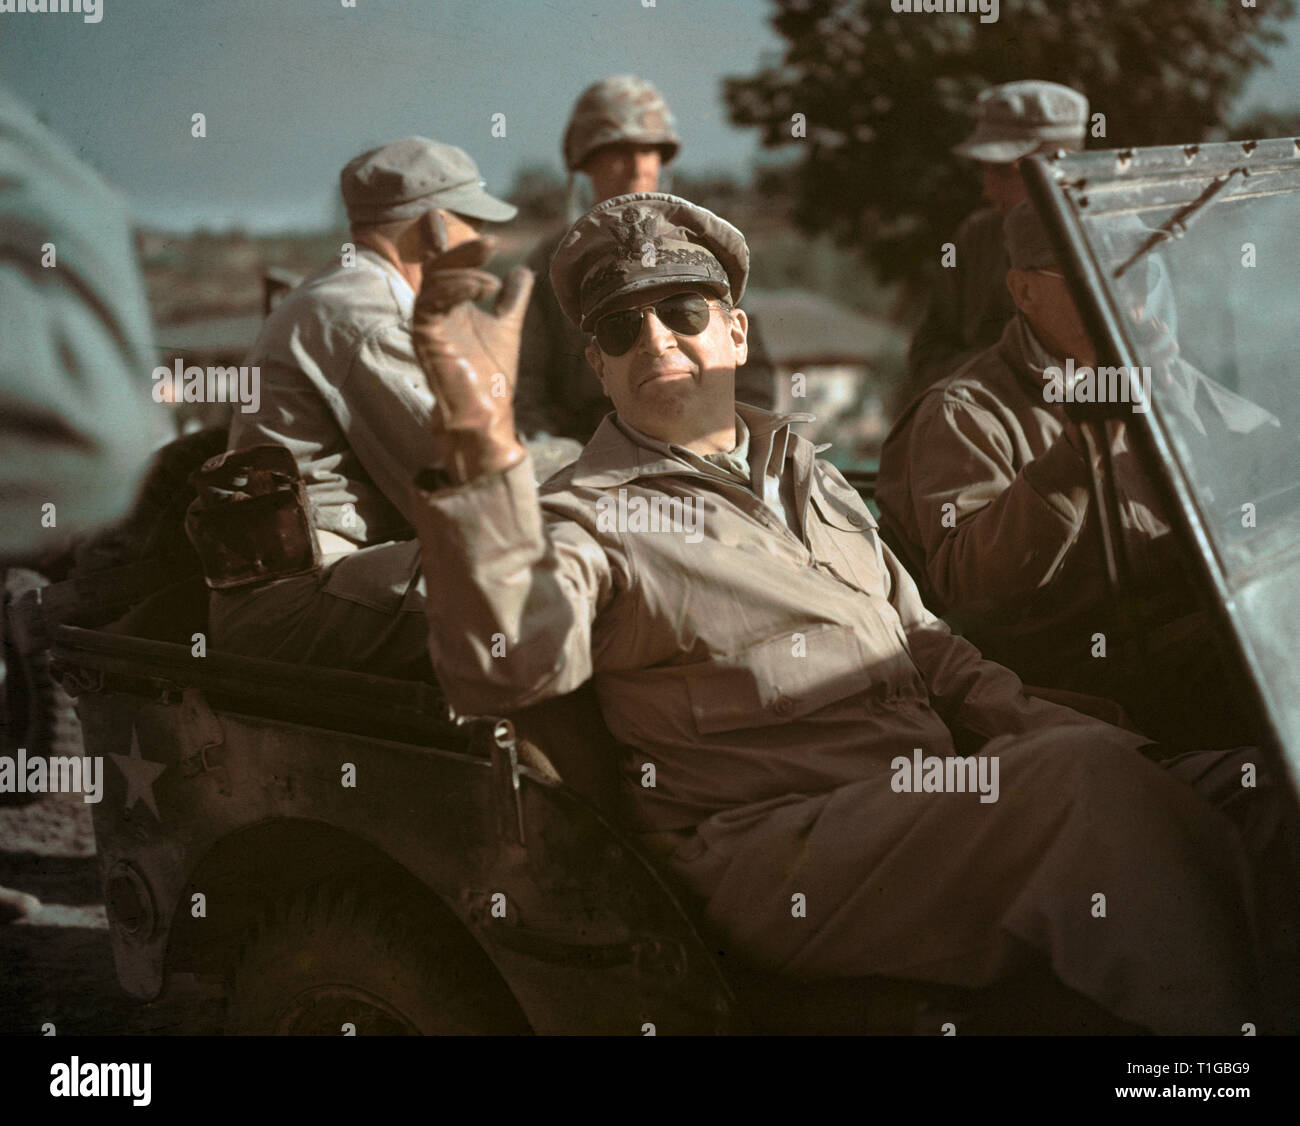 General Douglas MacArthur waving while Riding in a Jeep,  (1950), Seoul, South Korea  File Reference # 1003_737THA Stock Photo